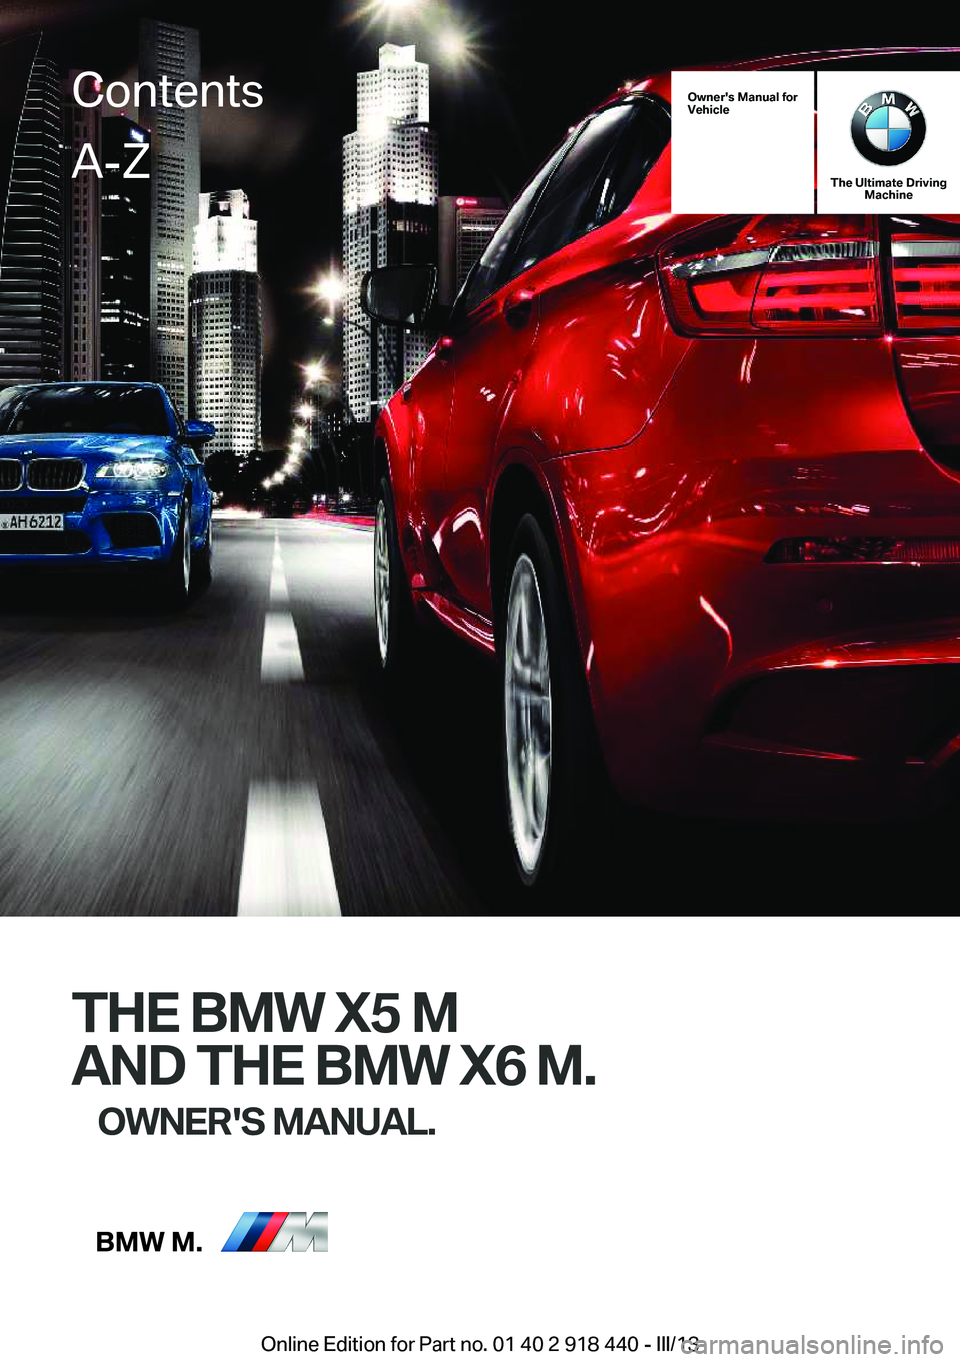 BMW X5M 2013  Owners Manual Owner's Manual for
Vehicle
The Ultimate Driving Machine
THE BMW X5 M
AND THE BMW X6 M. OWNER'S MANUAL.
ContentsA-Z
Online Edition for Part no. 01 40 2 918 440 - III/13   